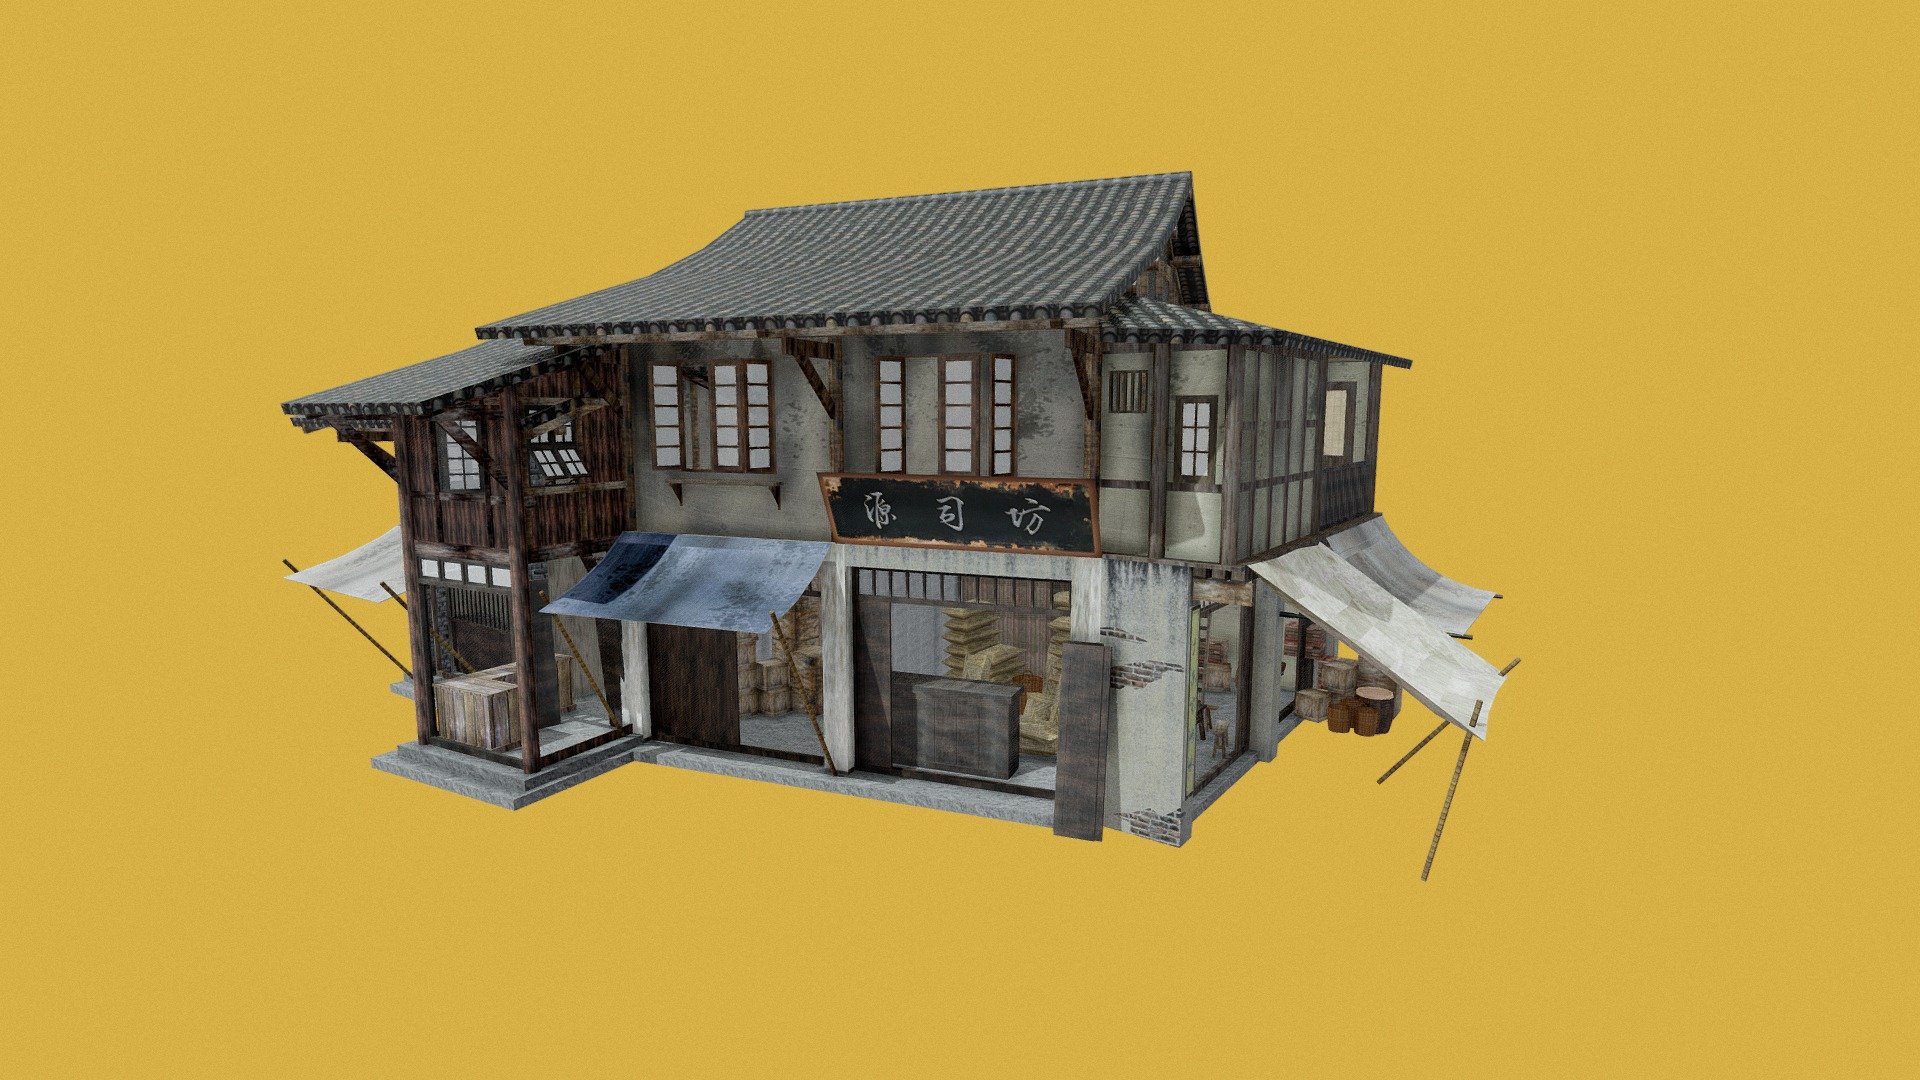 This Hakkas ancient building converges the culture of Hakkas and Sichuan tradition, uhich is very important for the study of Hakkas culture and traditional residence in Sichuan 3d model